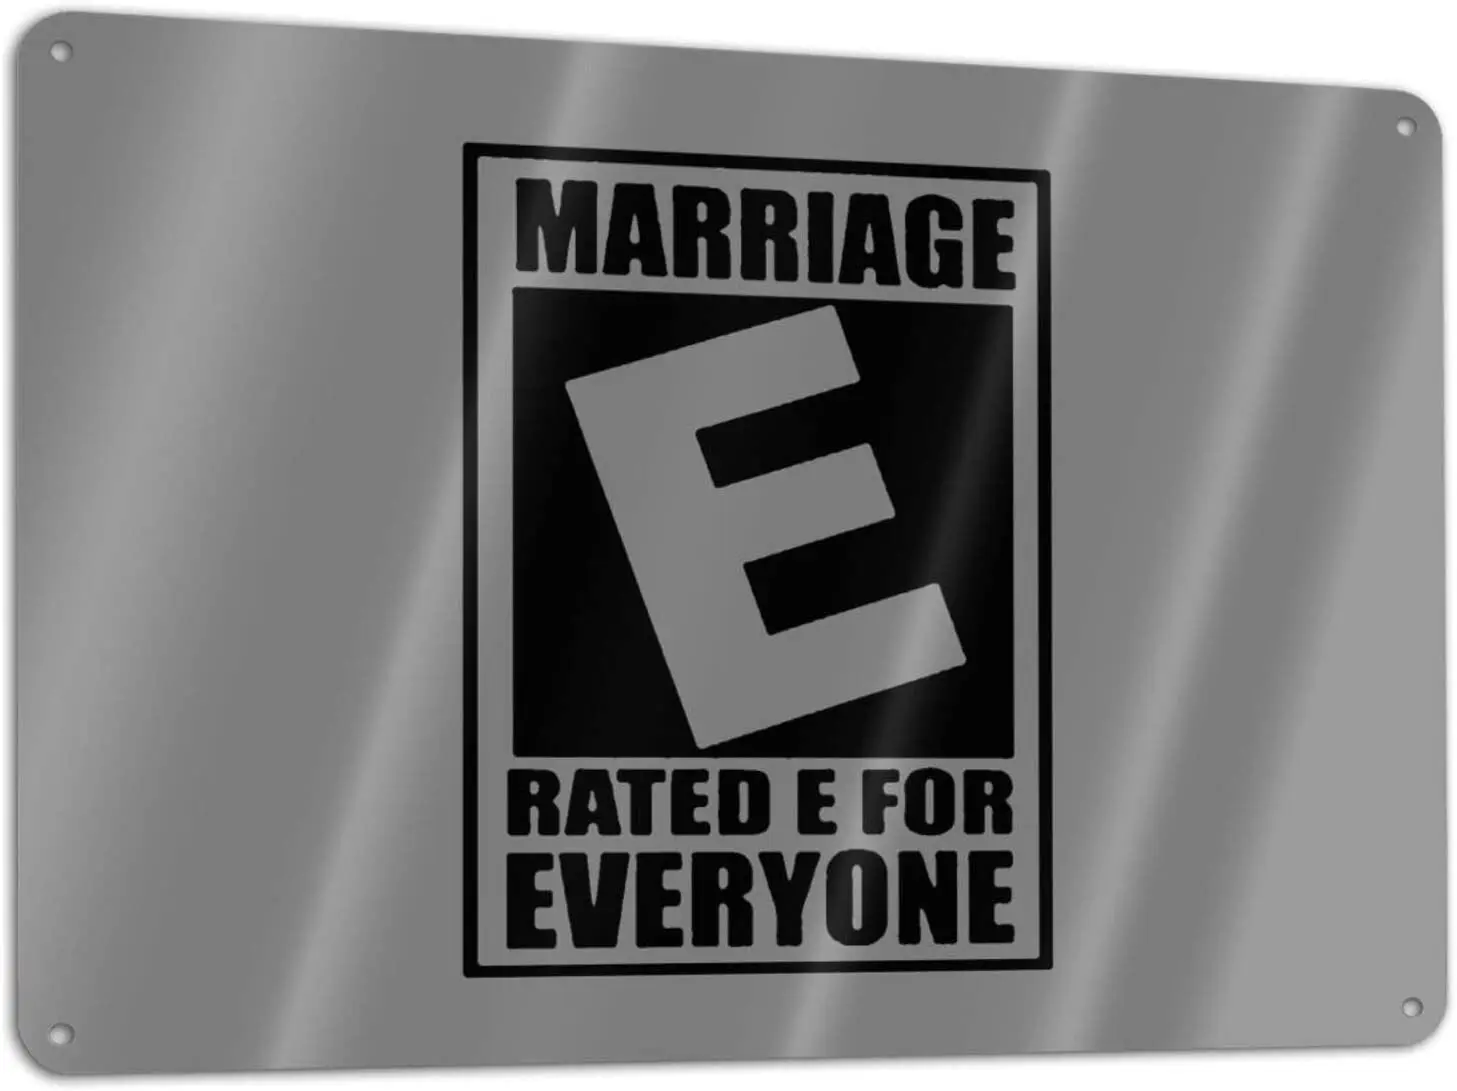 

Rated E Marriage is for Everyone Poster Funny Art Decor Vintage Aluminum Retro Metal Tin Sign Painting Decorative Signs 20x30cm